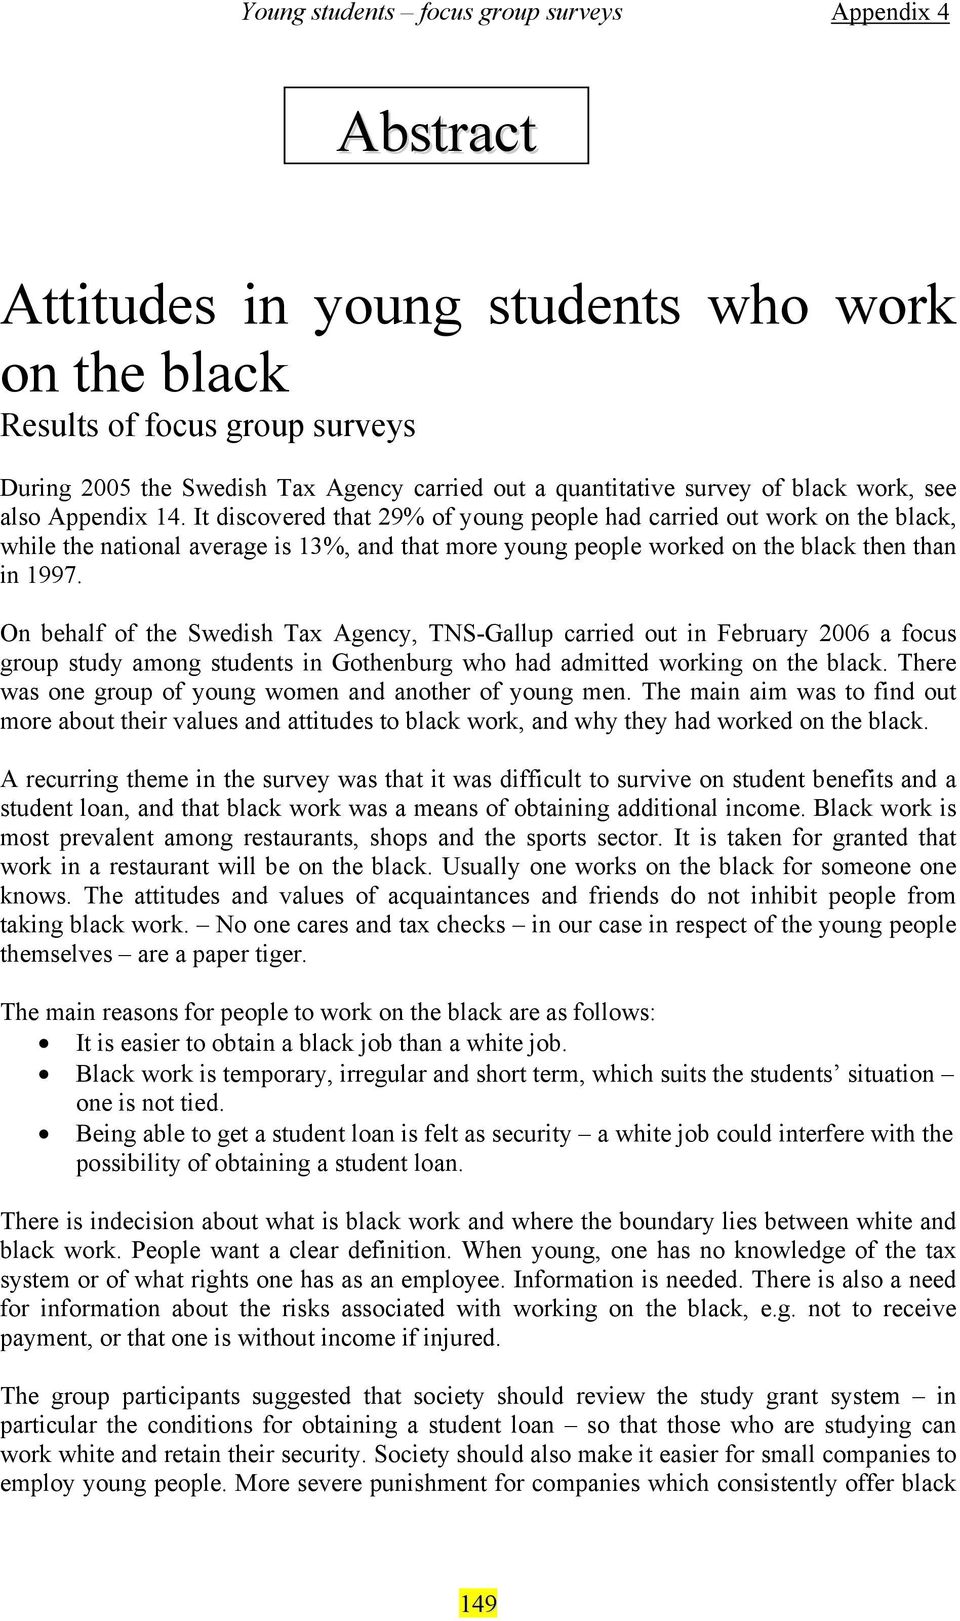 On behalf of the Swedish Tax Agency, TNS-Gallup carried out in February 2006 a focus group study among students in Gothenburg who had admitted working on the black.